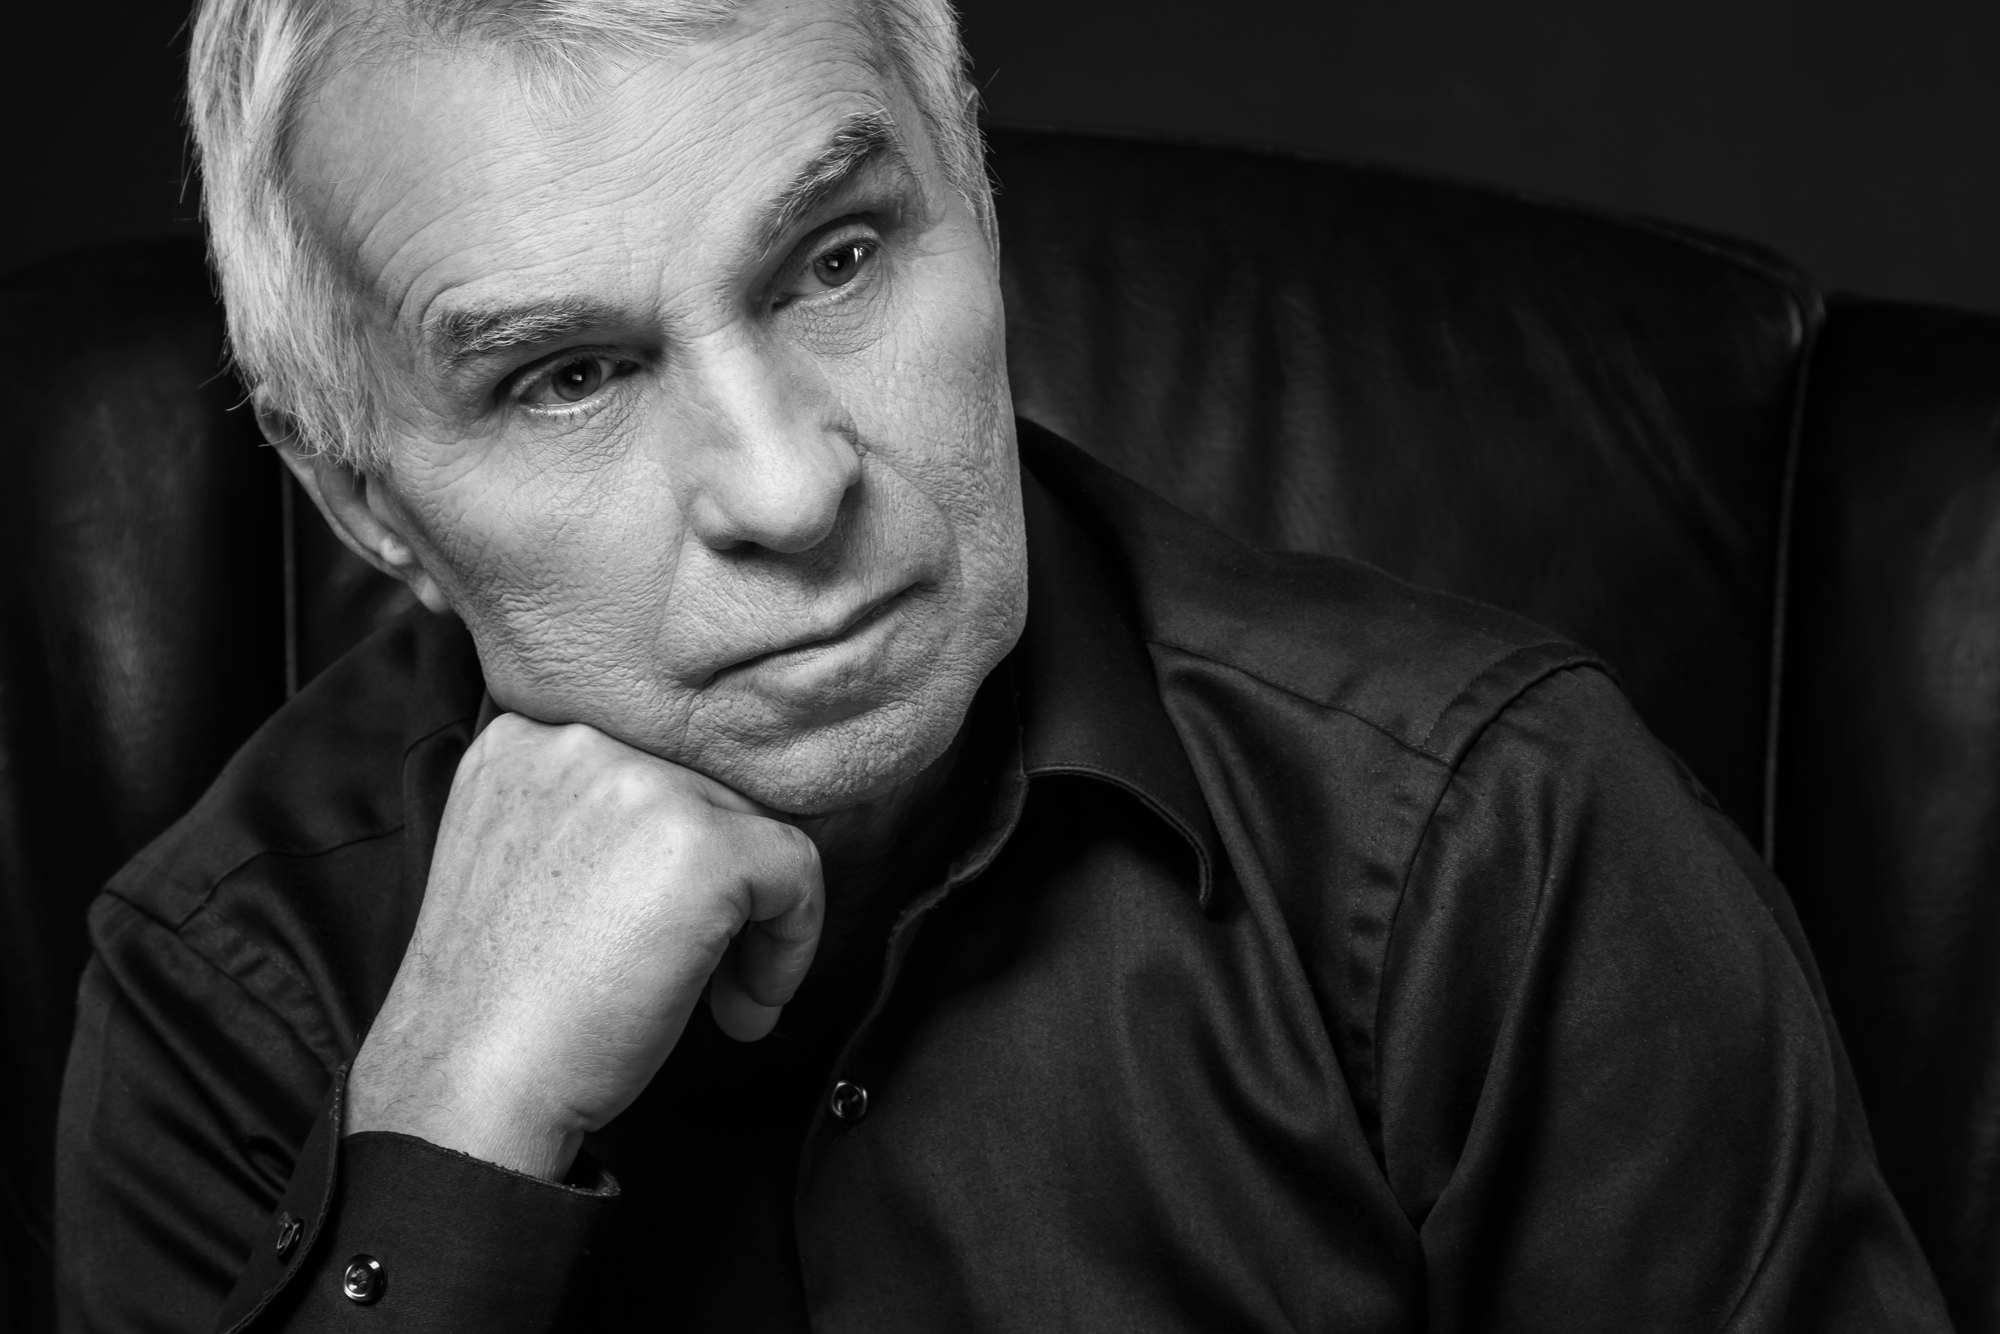 A grayscale image of an older man with light hair, sitting in a leather chair. He is wearing a long-sleeve button-up shirt and has a contemplative expression, with his chin resting on his hand and looking slightly to the side. The background is dark and plain.